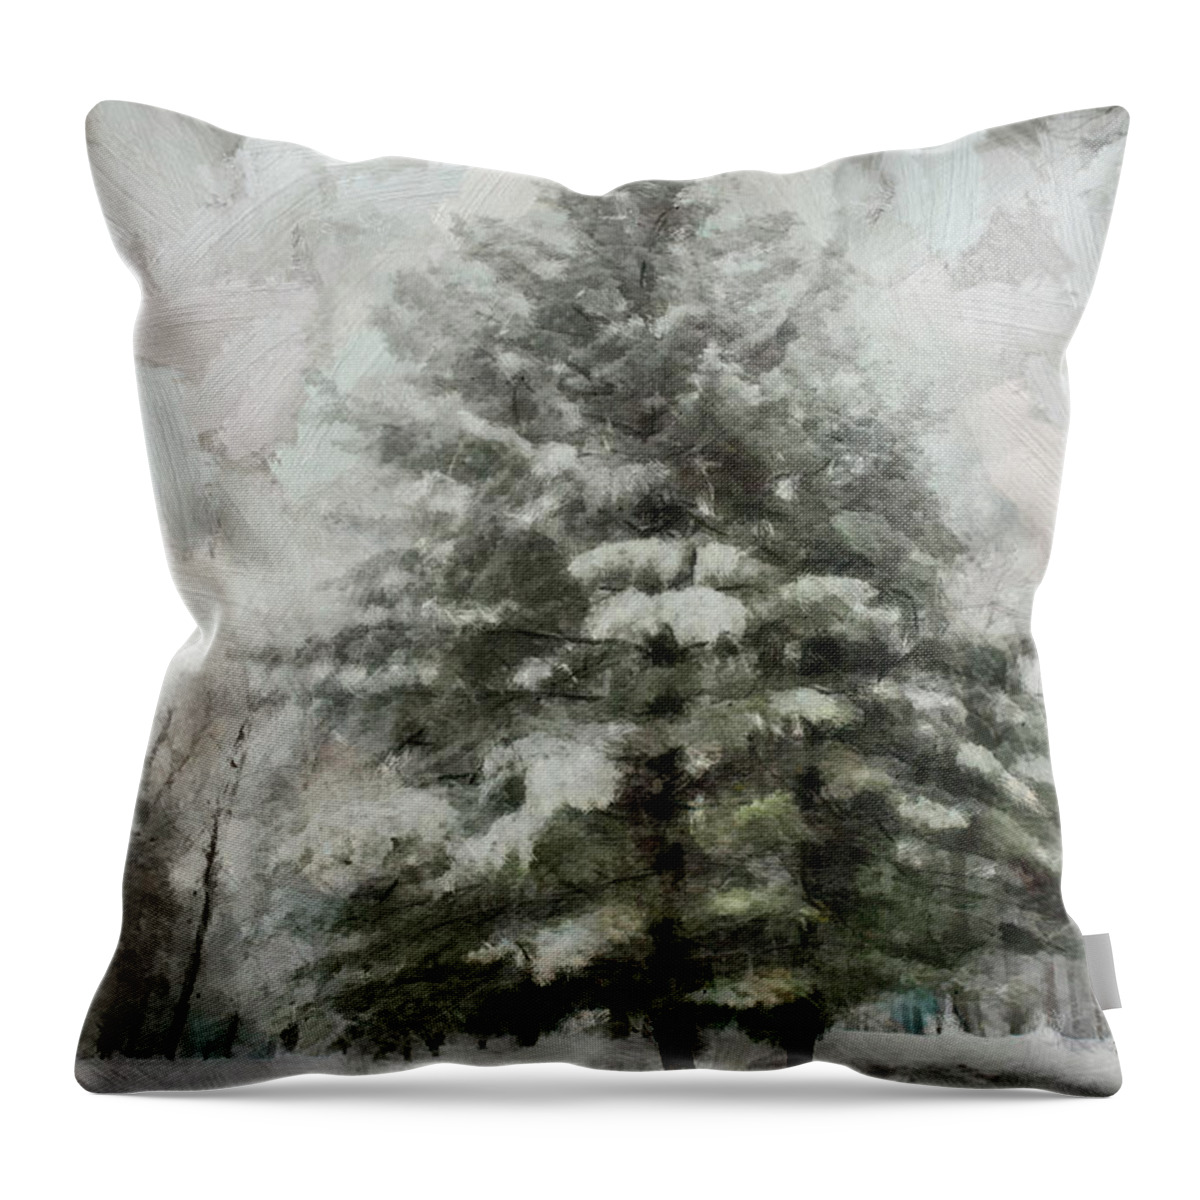 Pine Throw Pillow featuring the mixed media Old Piney by Trish Tritz